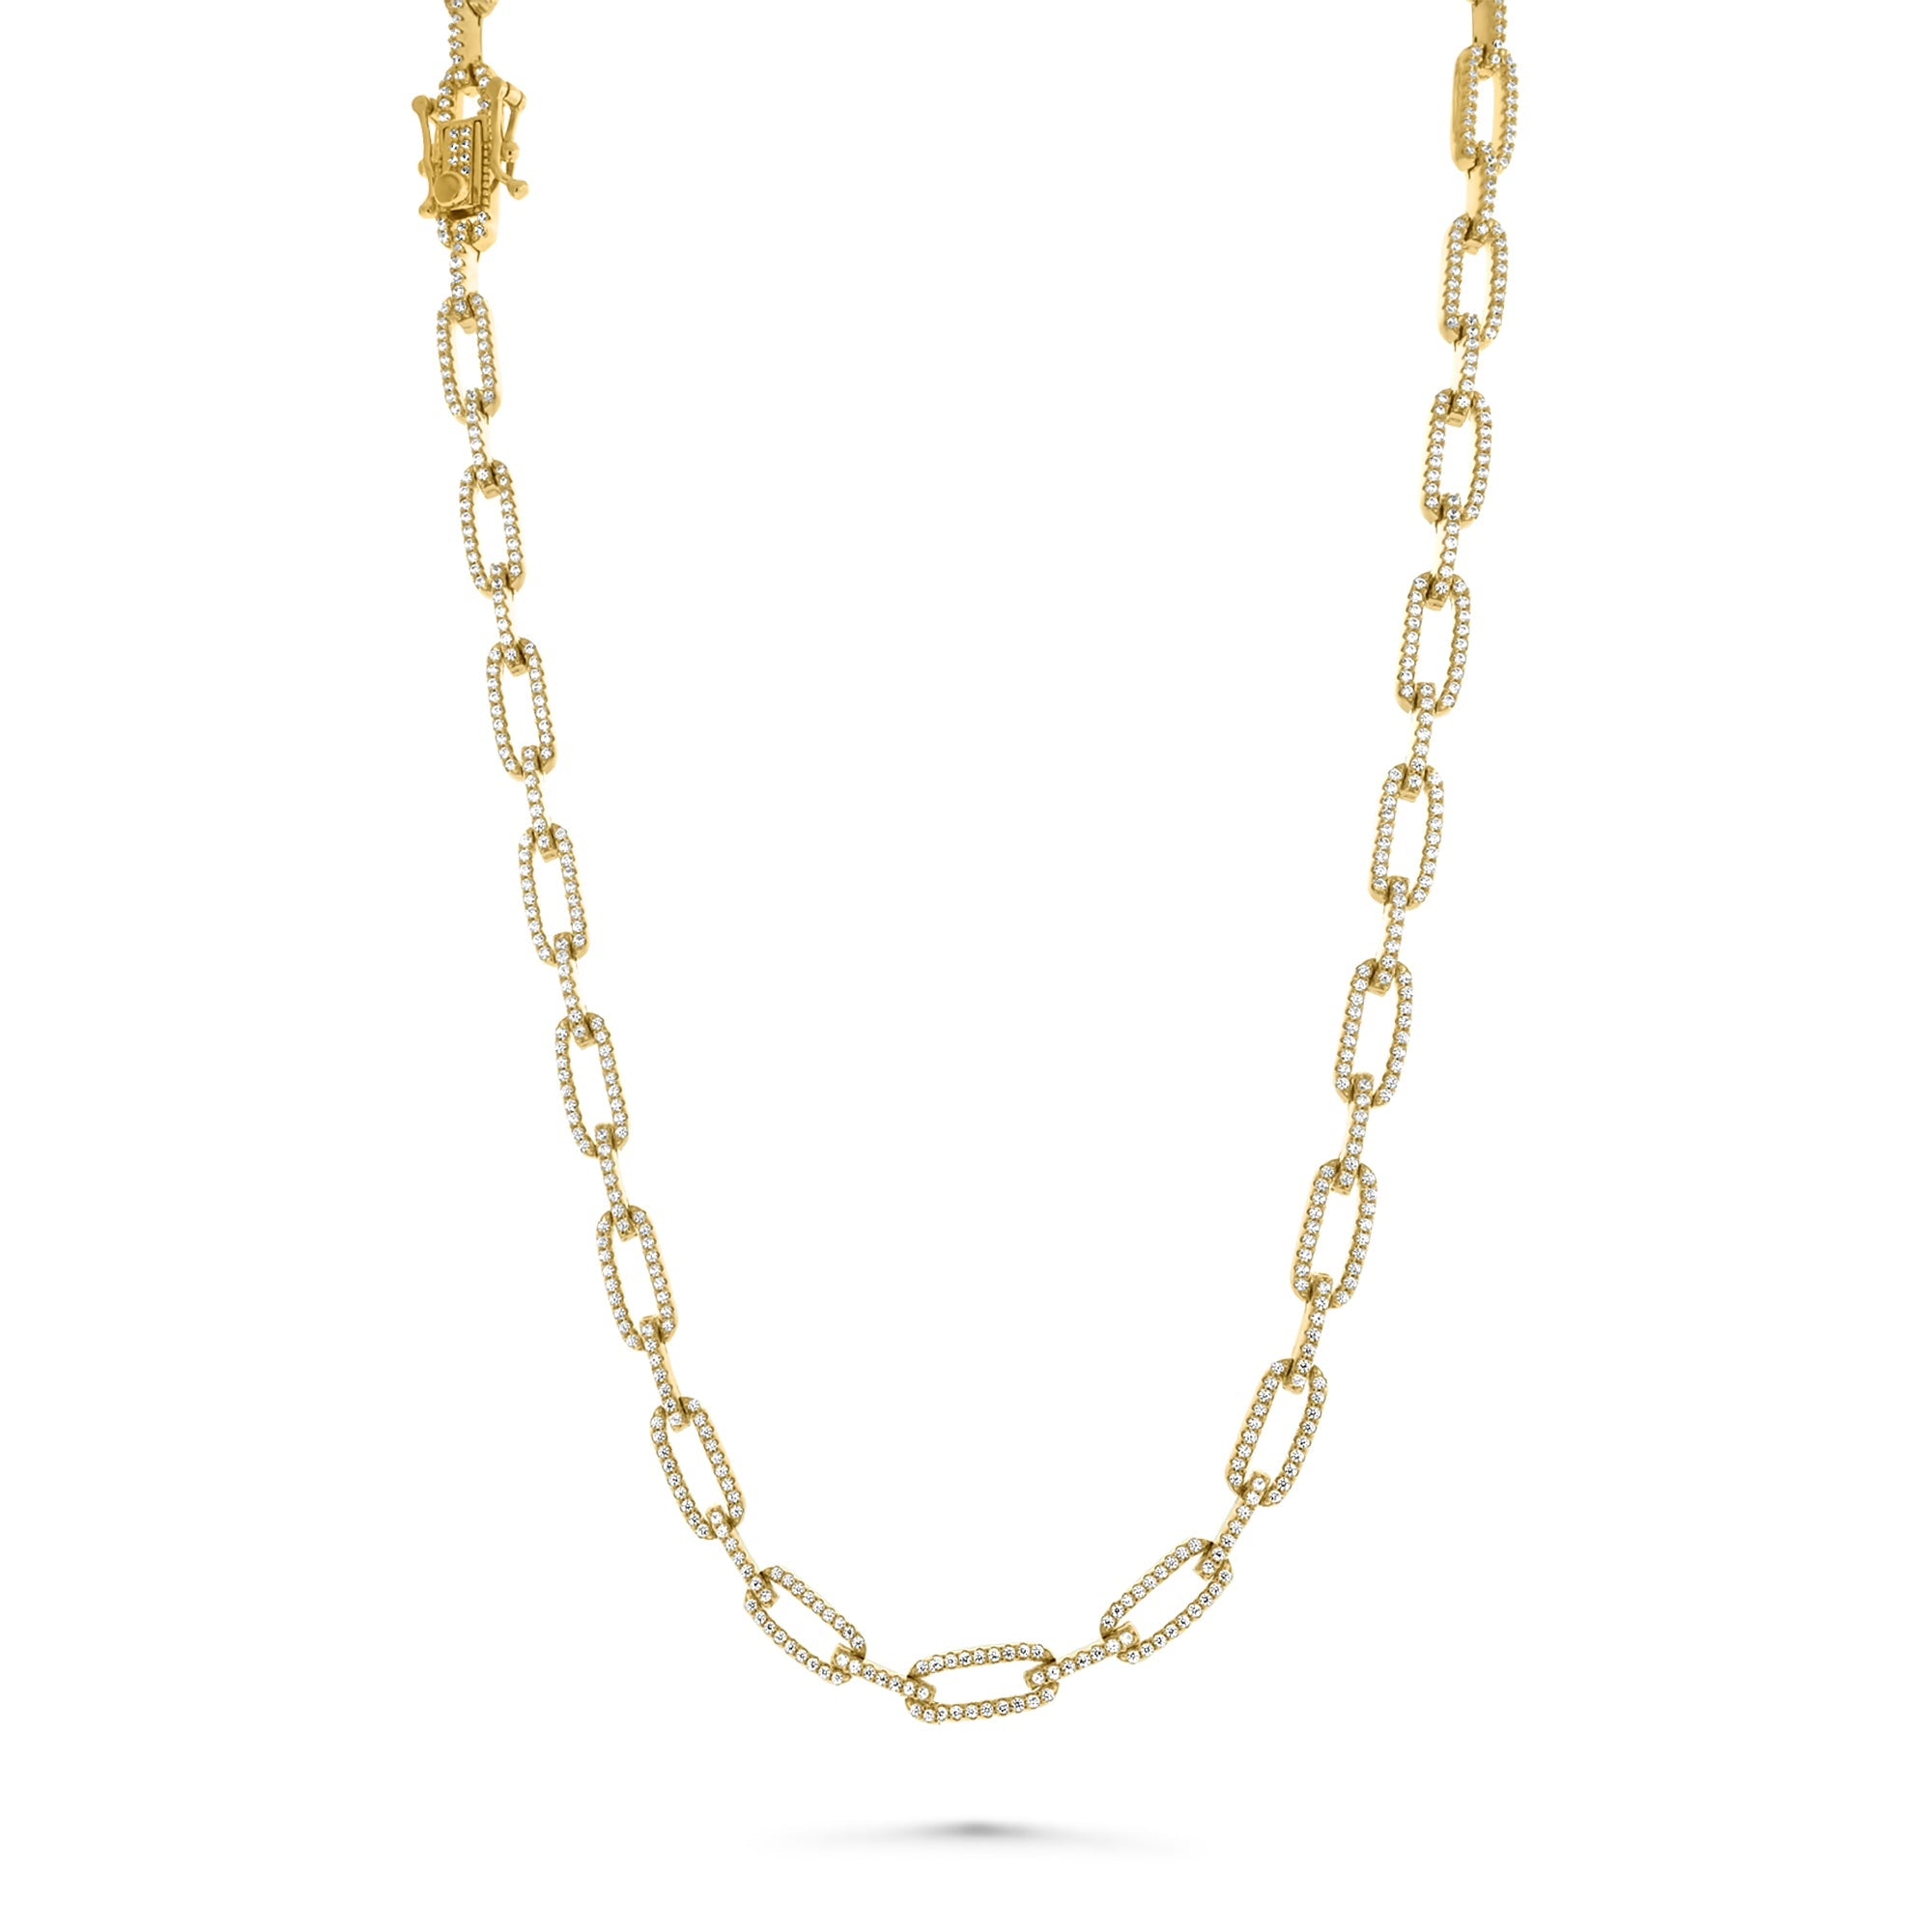 Gold Link Chain Necklace Sterling Silver Pave CZ